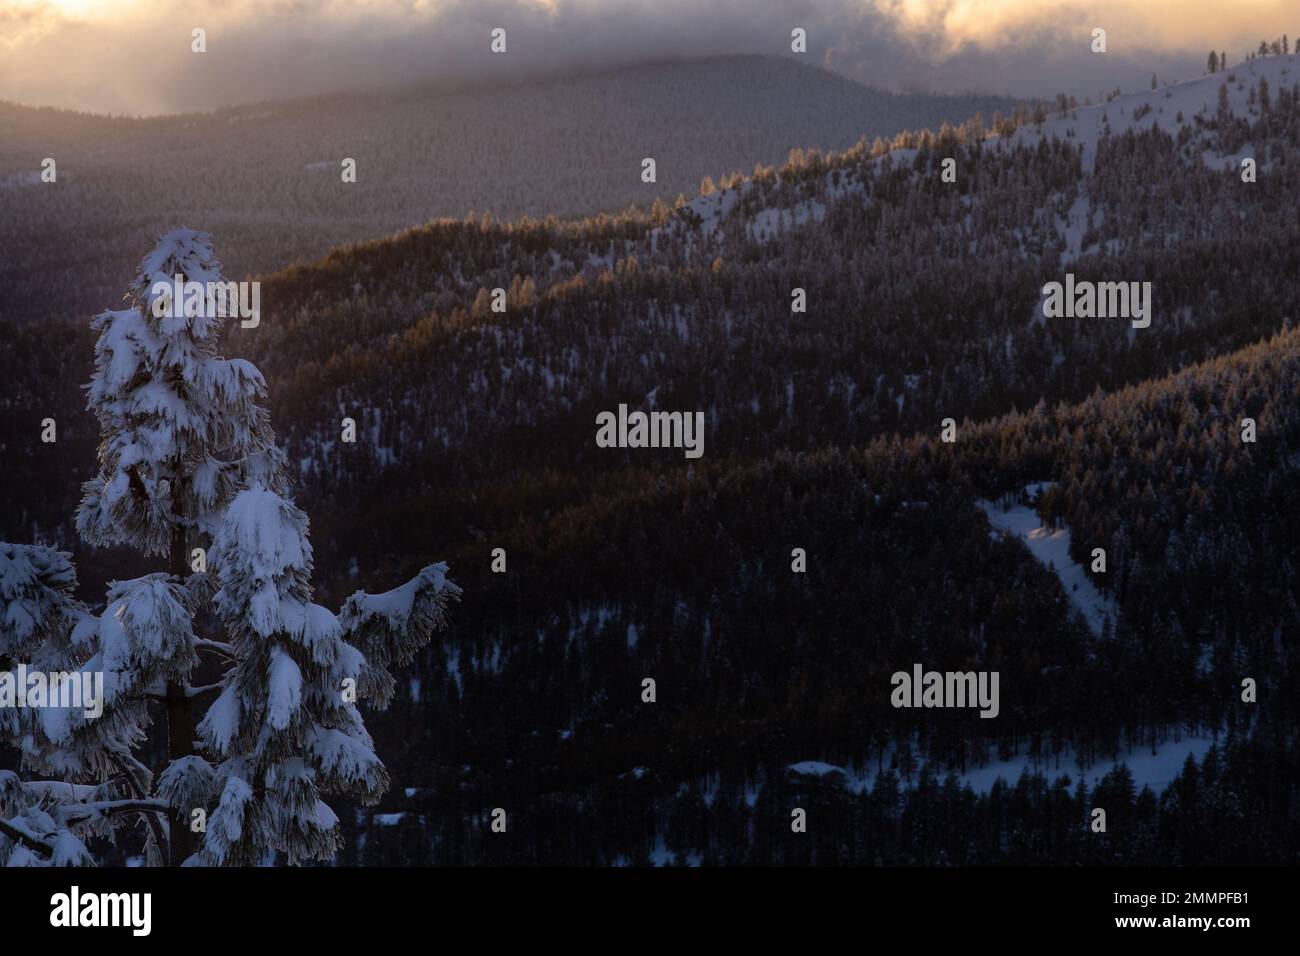 Paysage d'hiver - Lac Tahoe - Tahoe National Forest After Snow - Californie / Nevada Banque D'Images